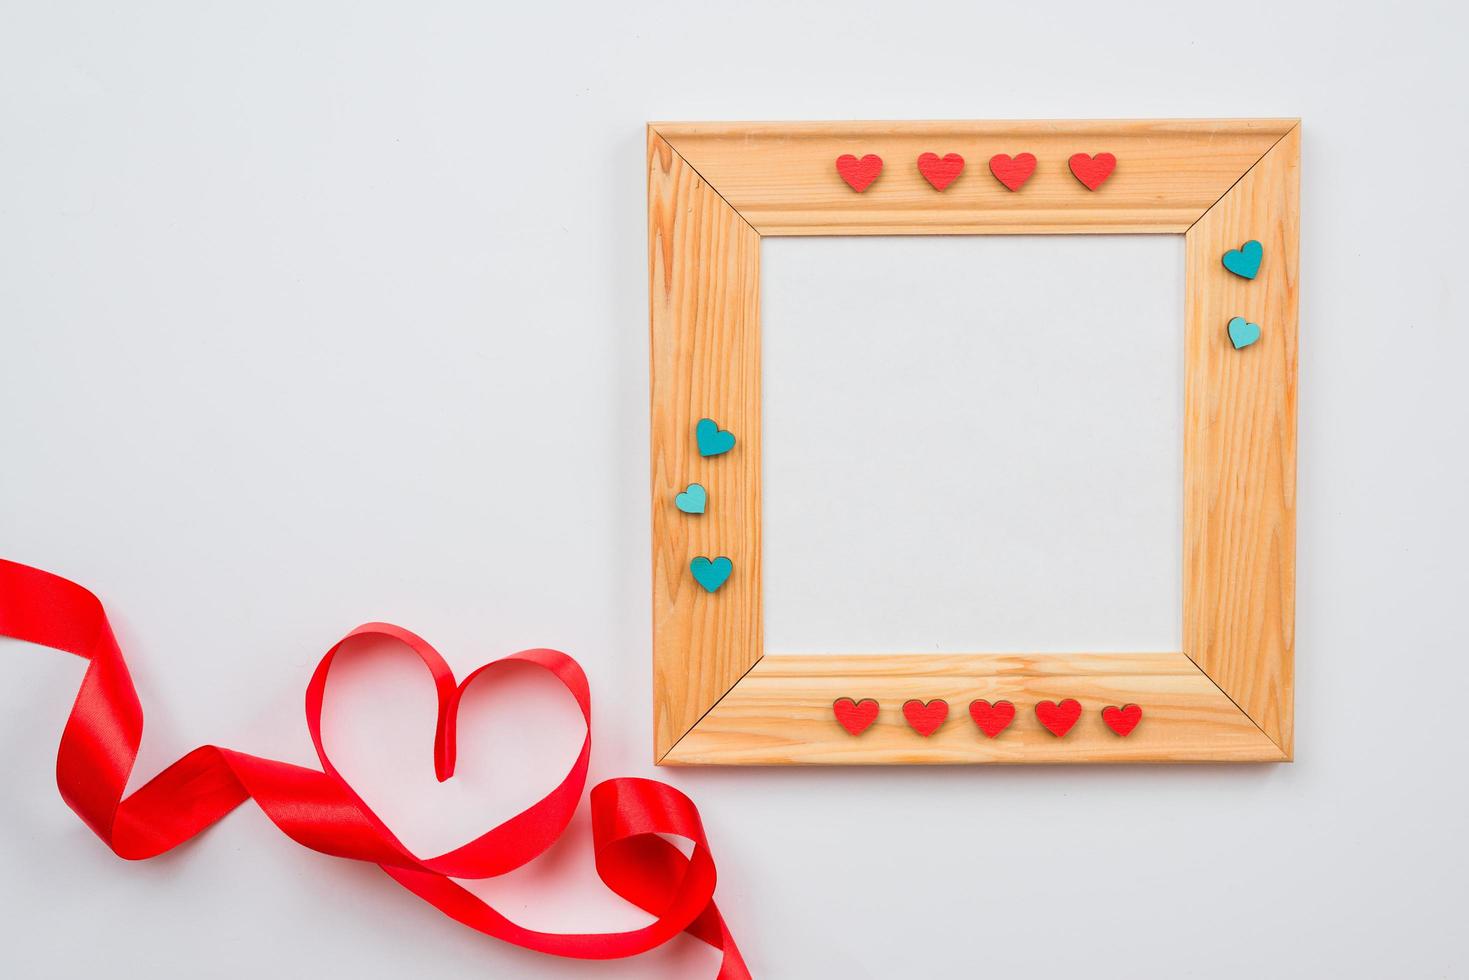 Wooden frame decorated with hearts and lined heart with red ribbon on a white background. Valentines day concept photo